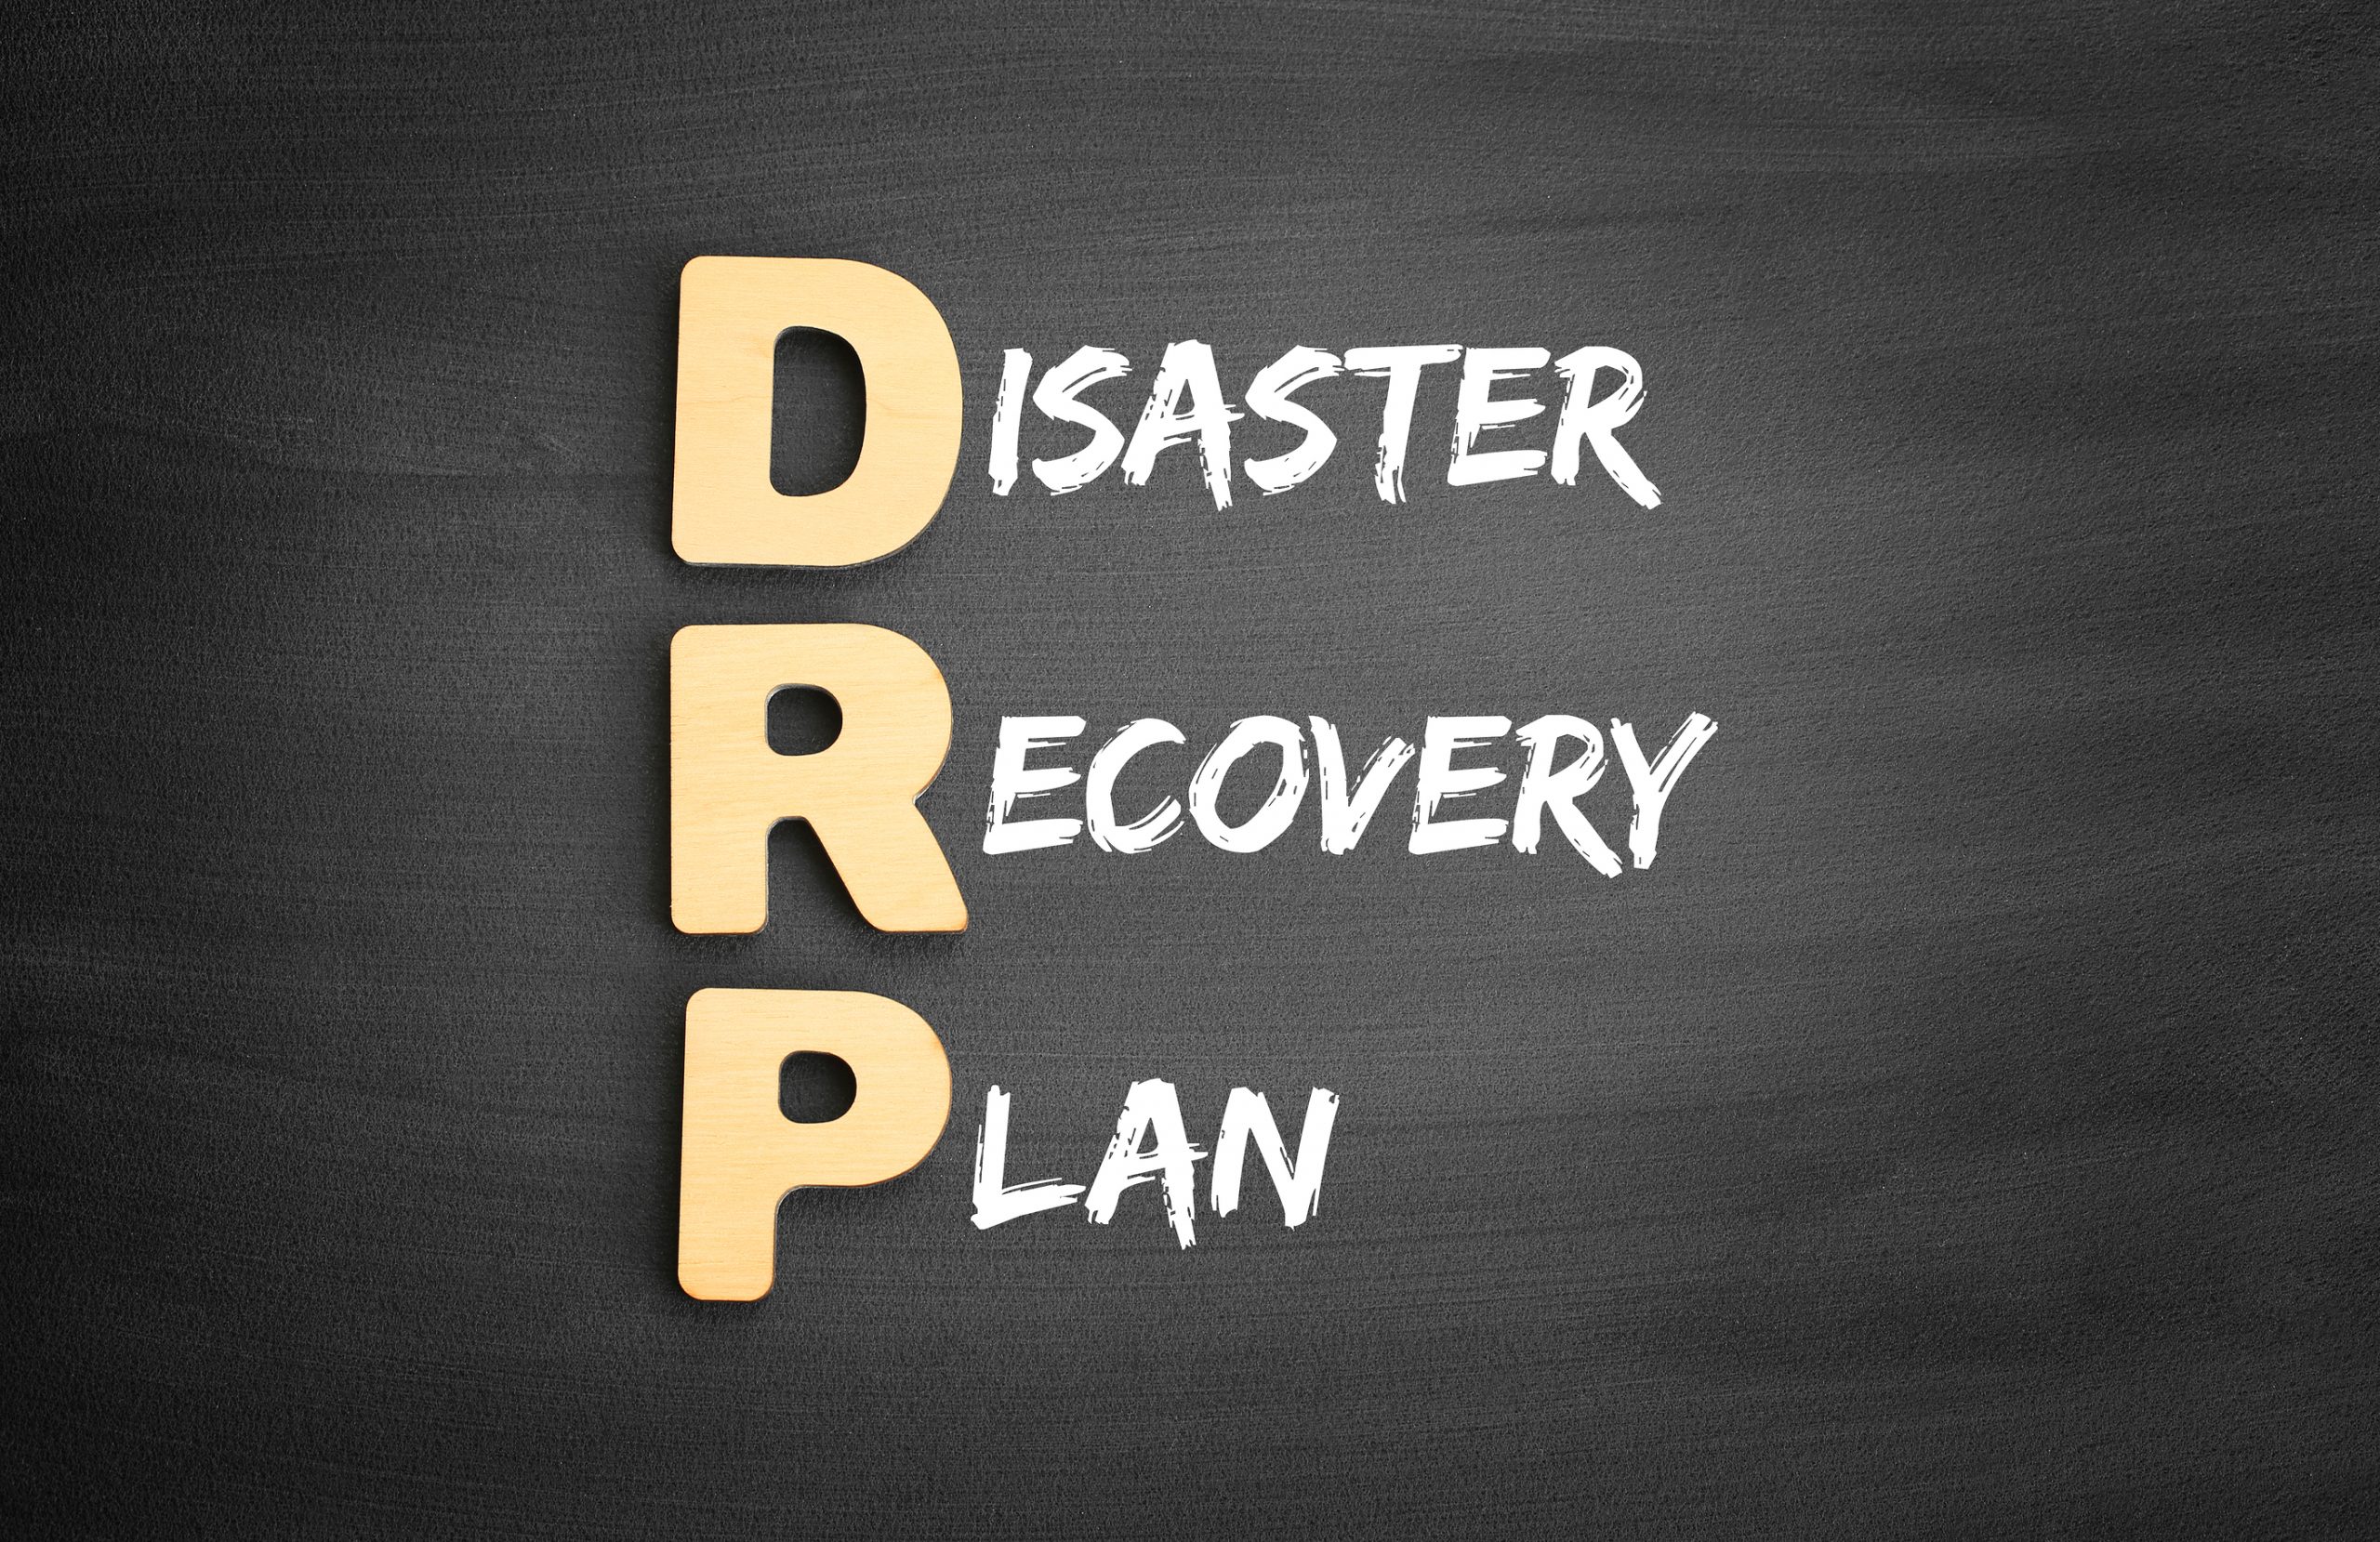 What Are the Biggest Mistakes in a Business Disaster Recovery Plan?